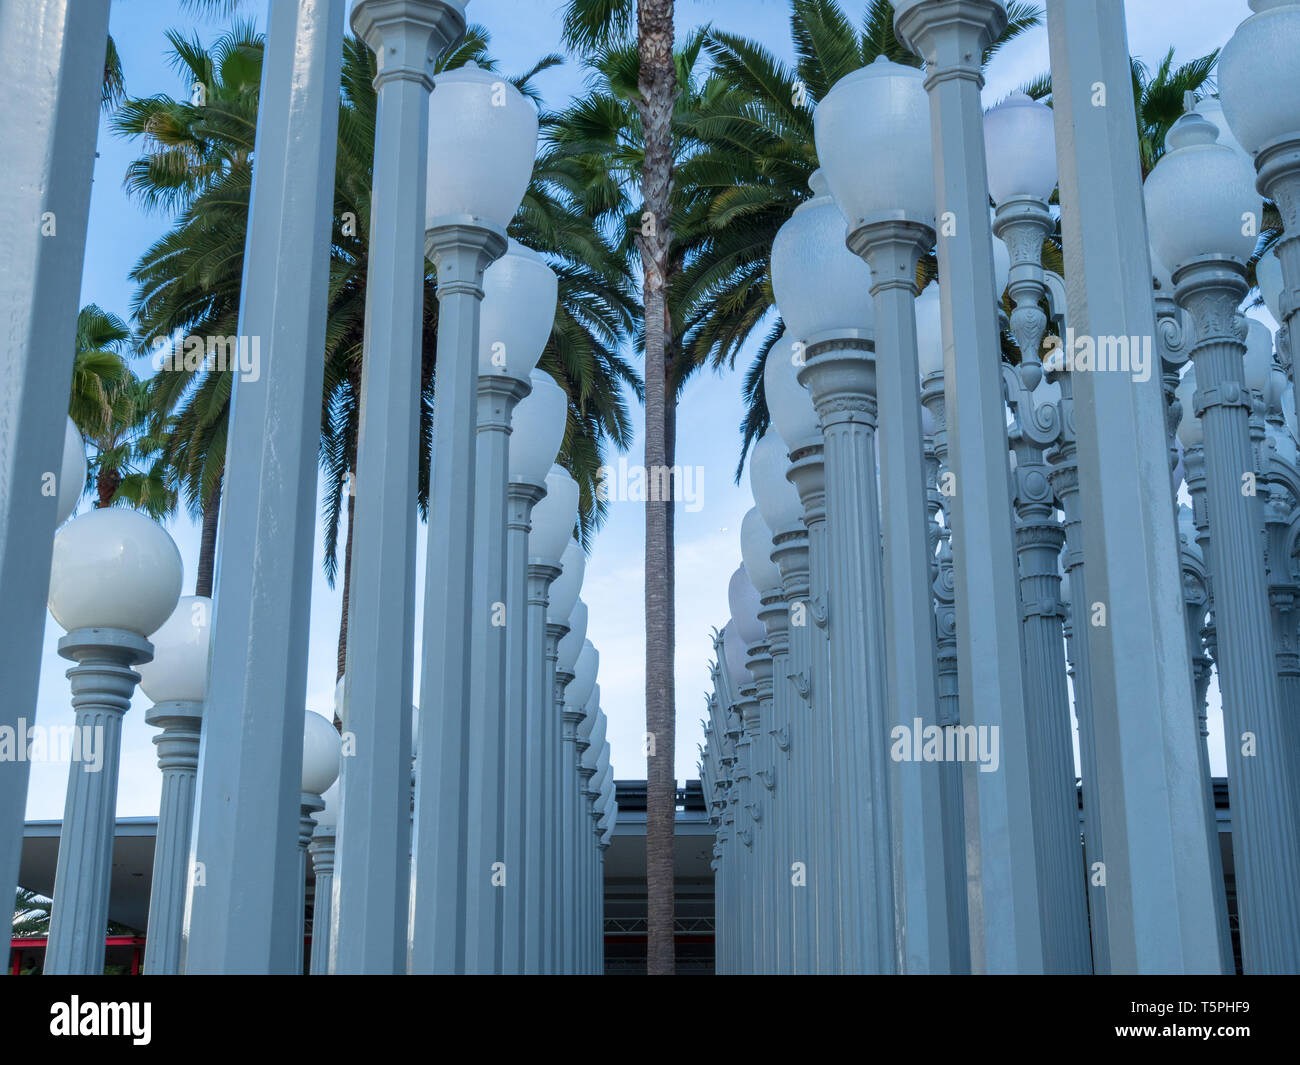 Old round light posts standing with palm trees in day time Stock Photo